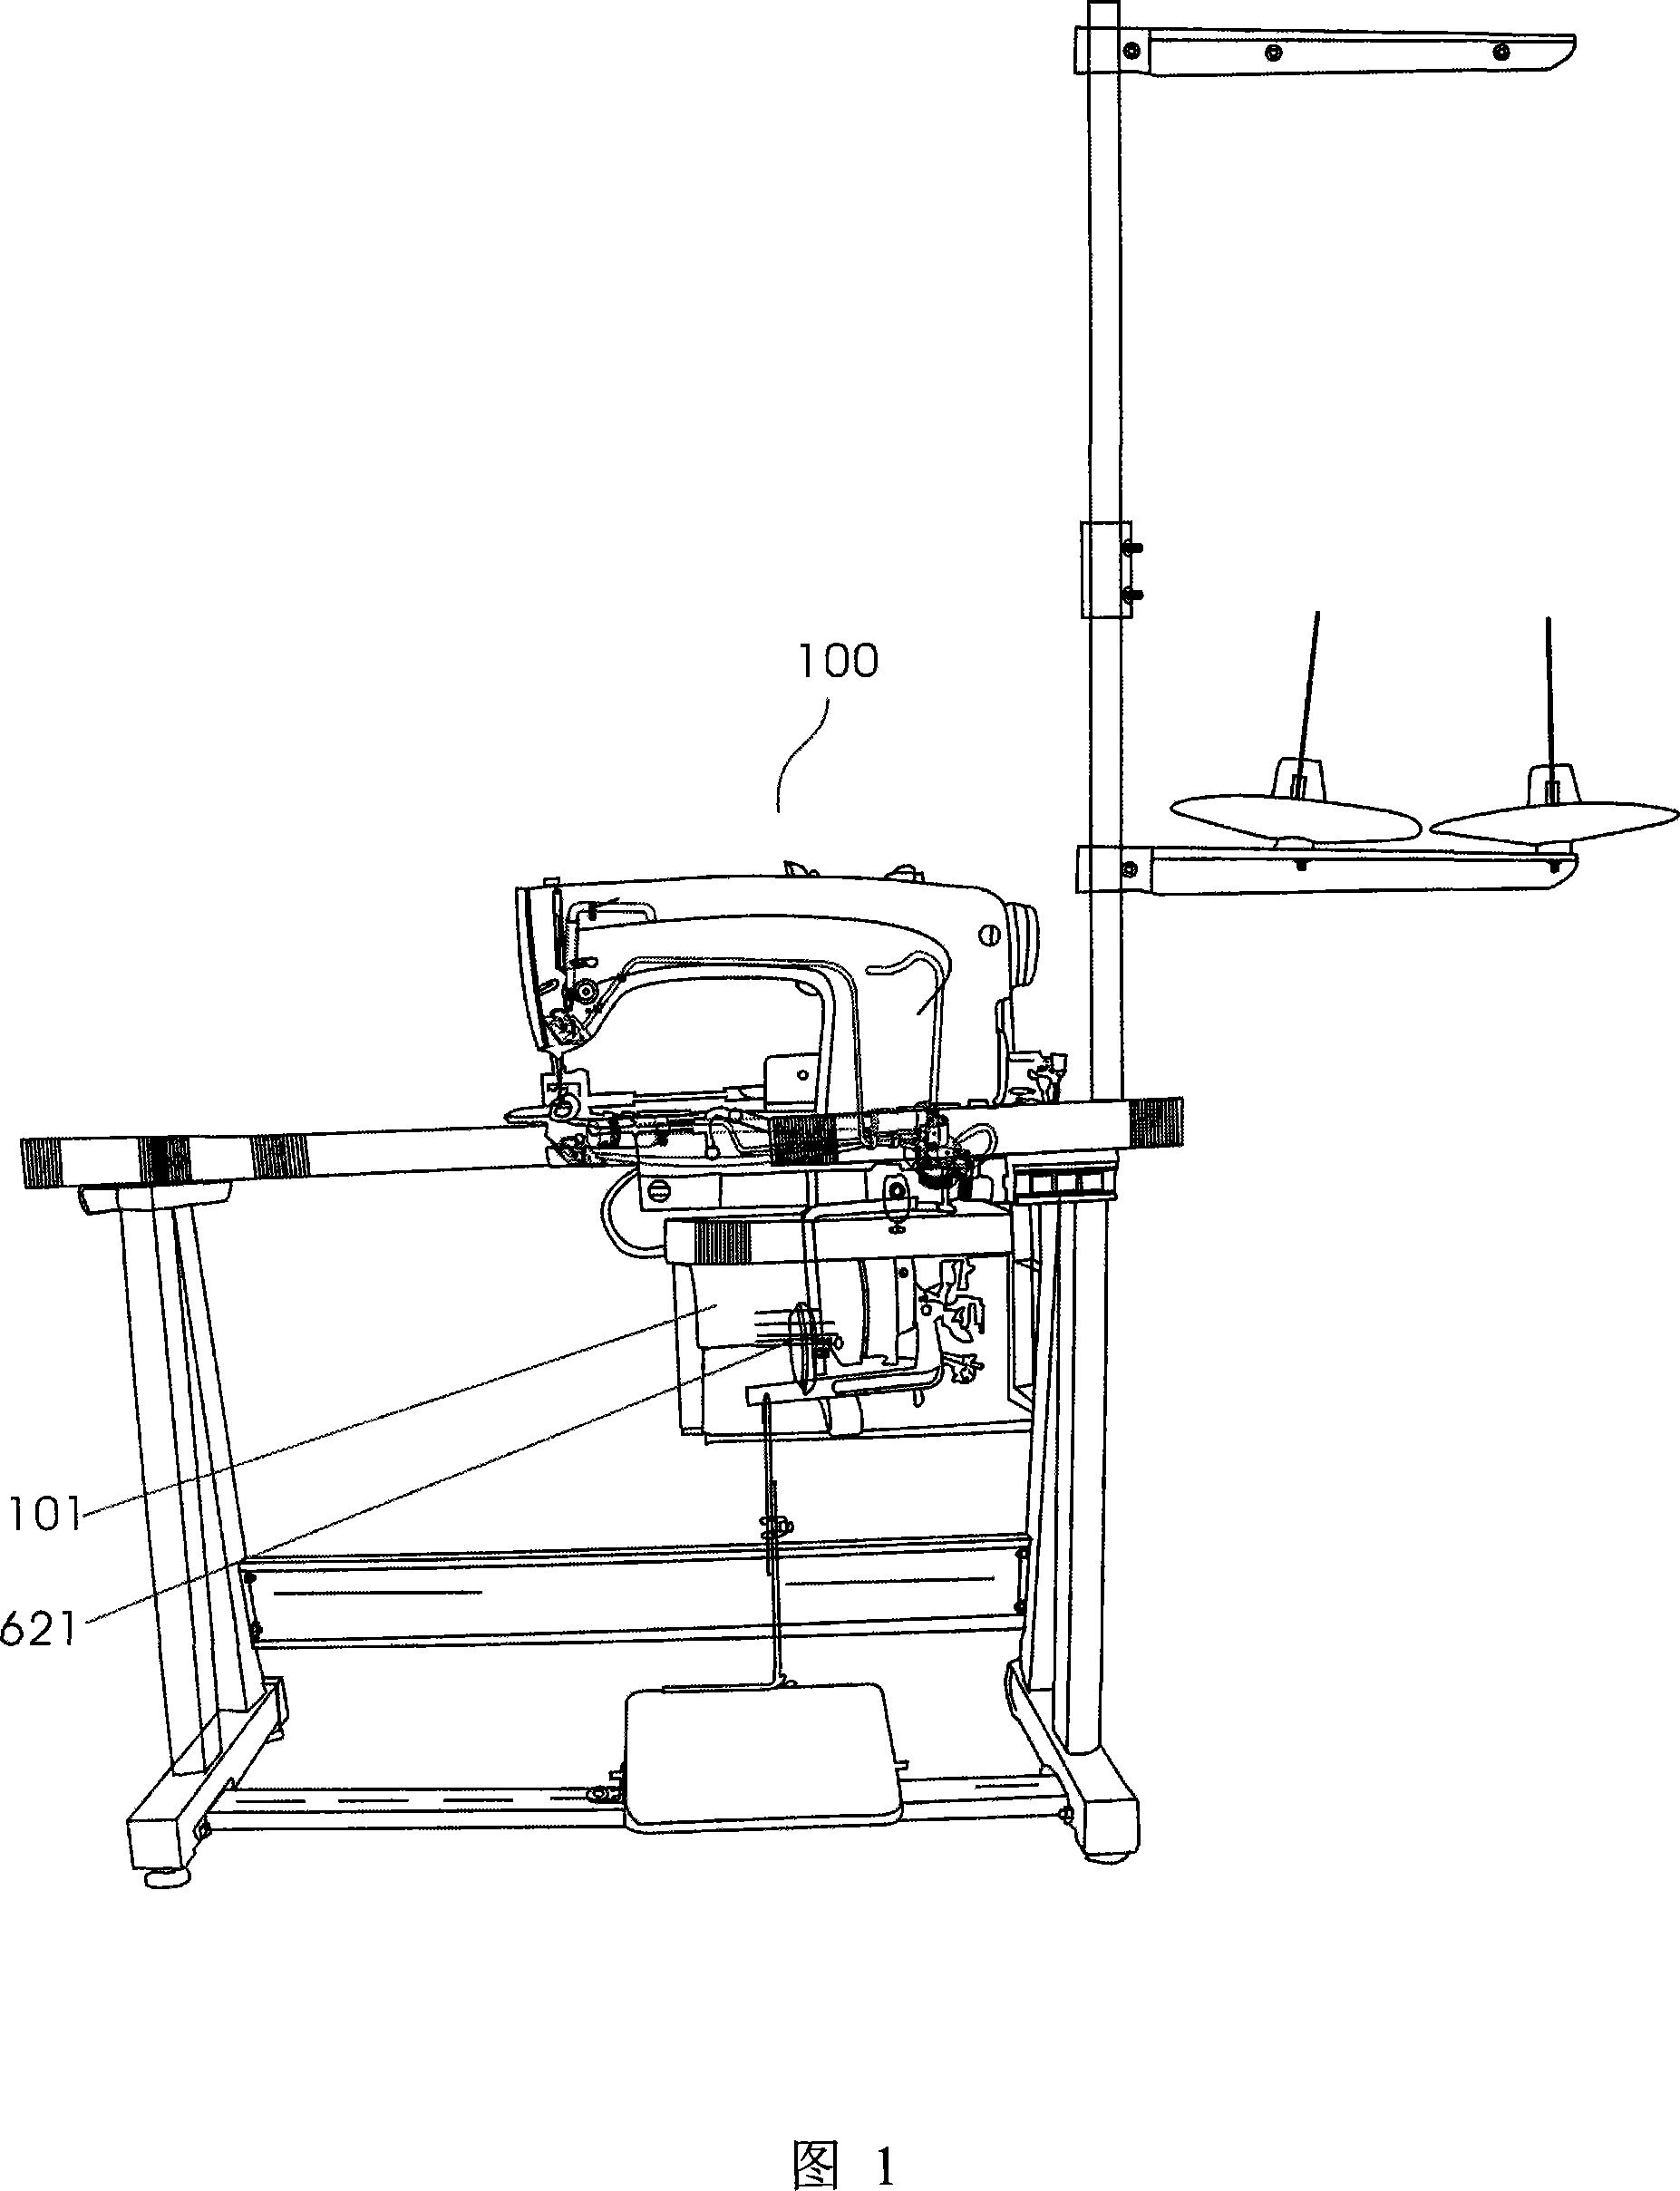 Hemming machine for sewing trousers bottom